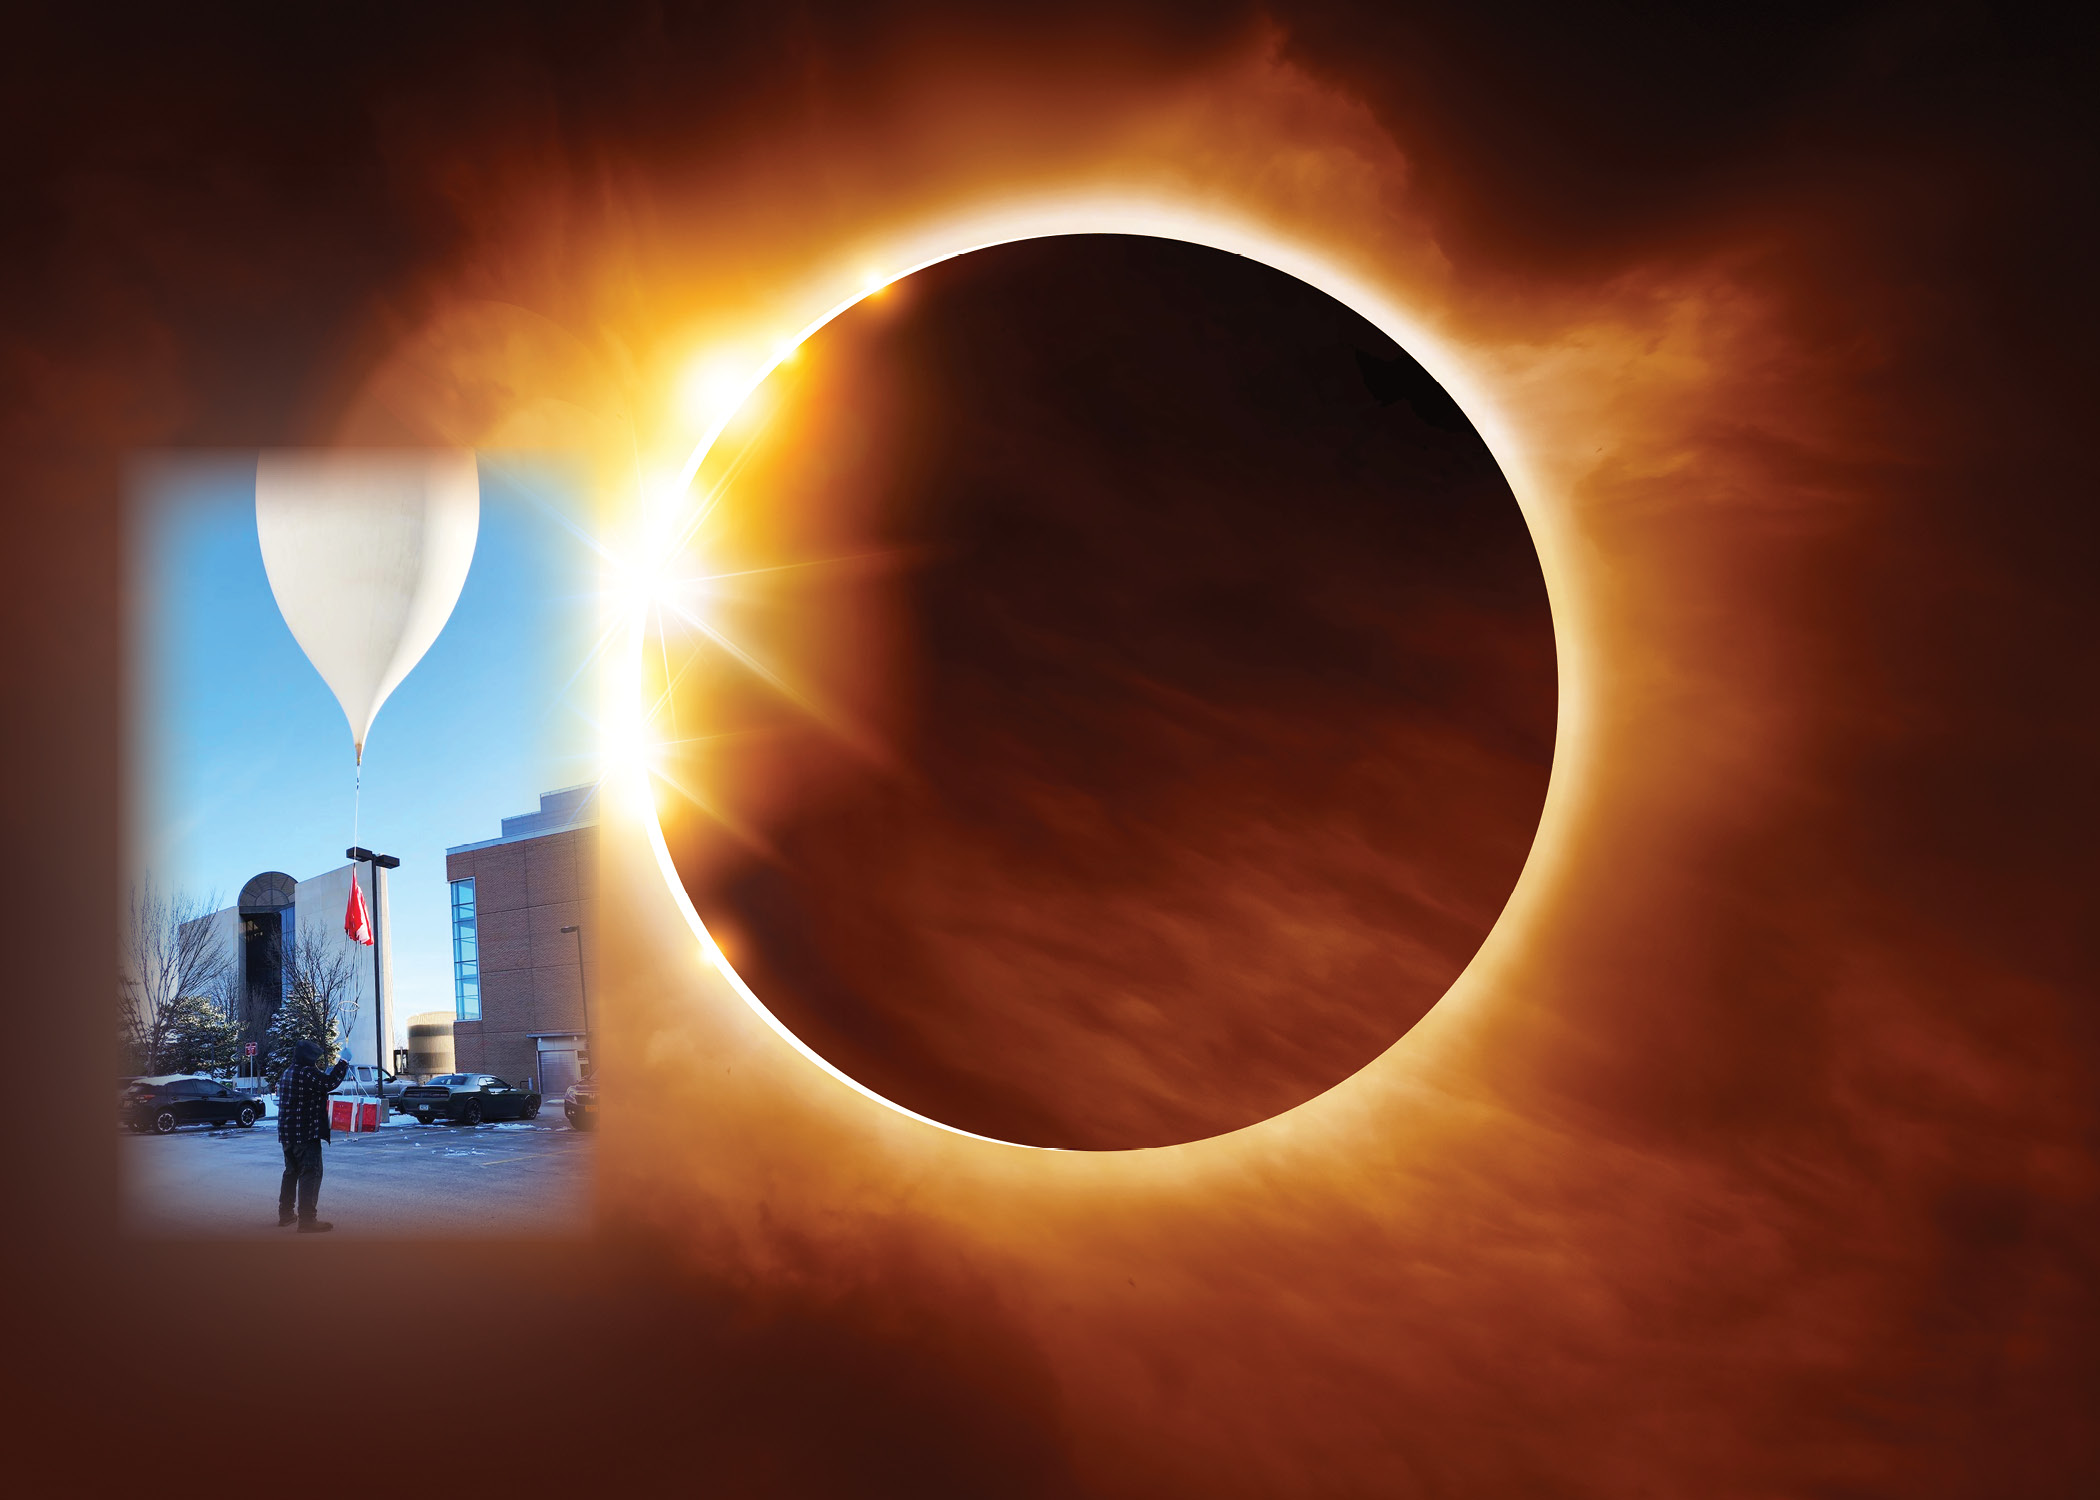 HABET balloon test launch photo superimposed on eclipse graphic